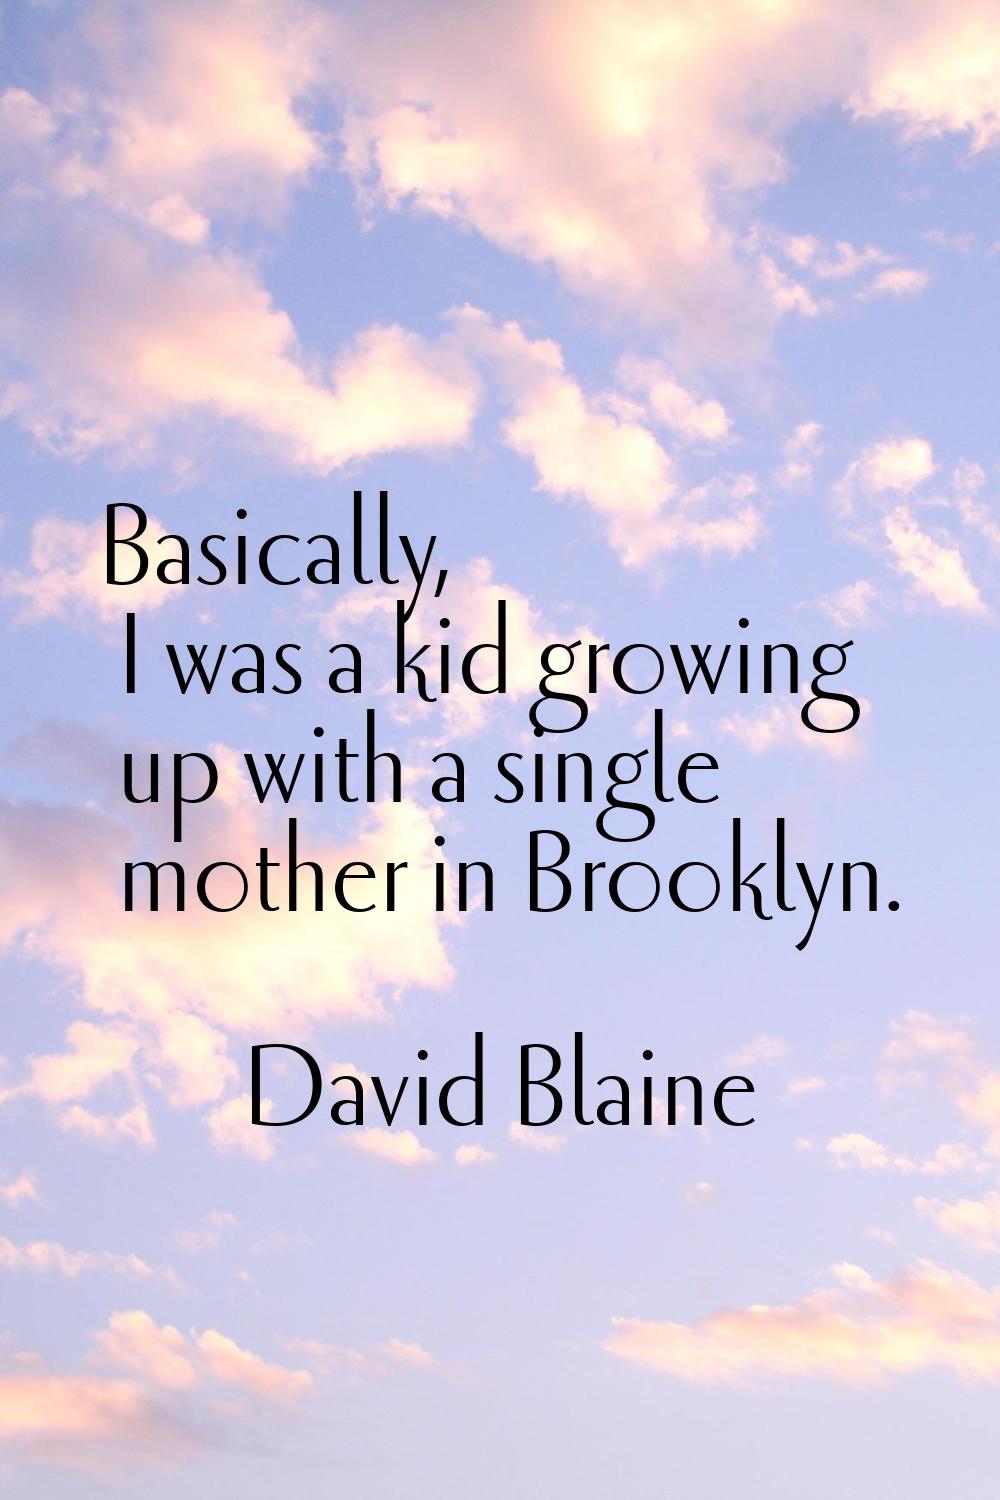 Basically, I was a kid growing up with a single mother in Brooklyn.